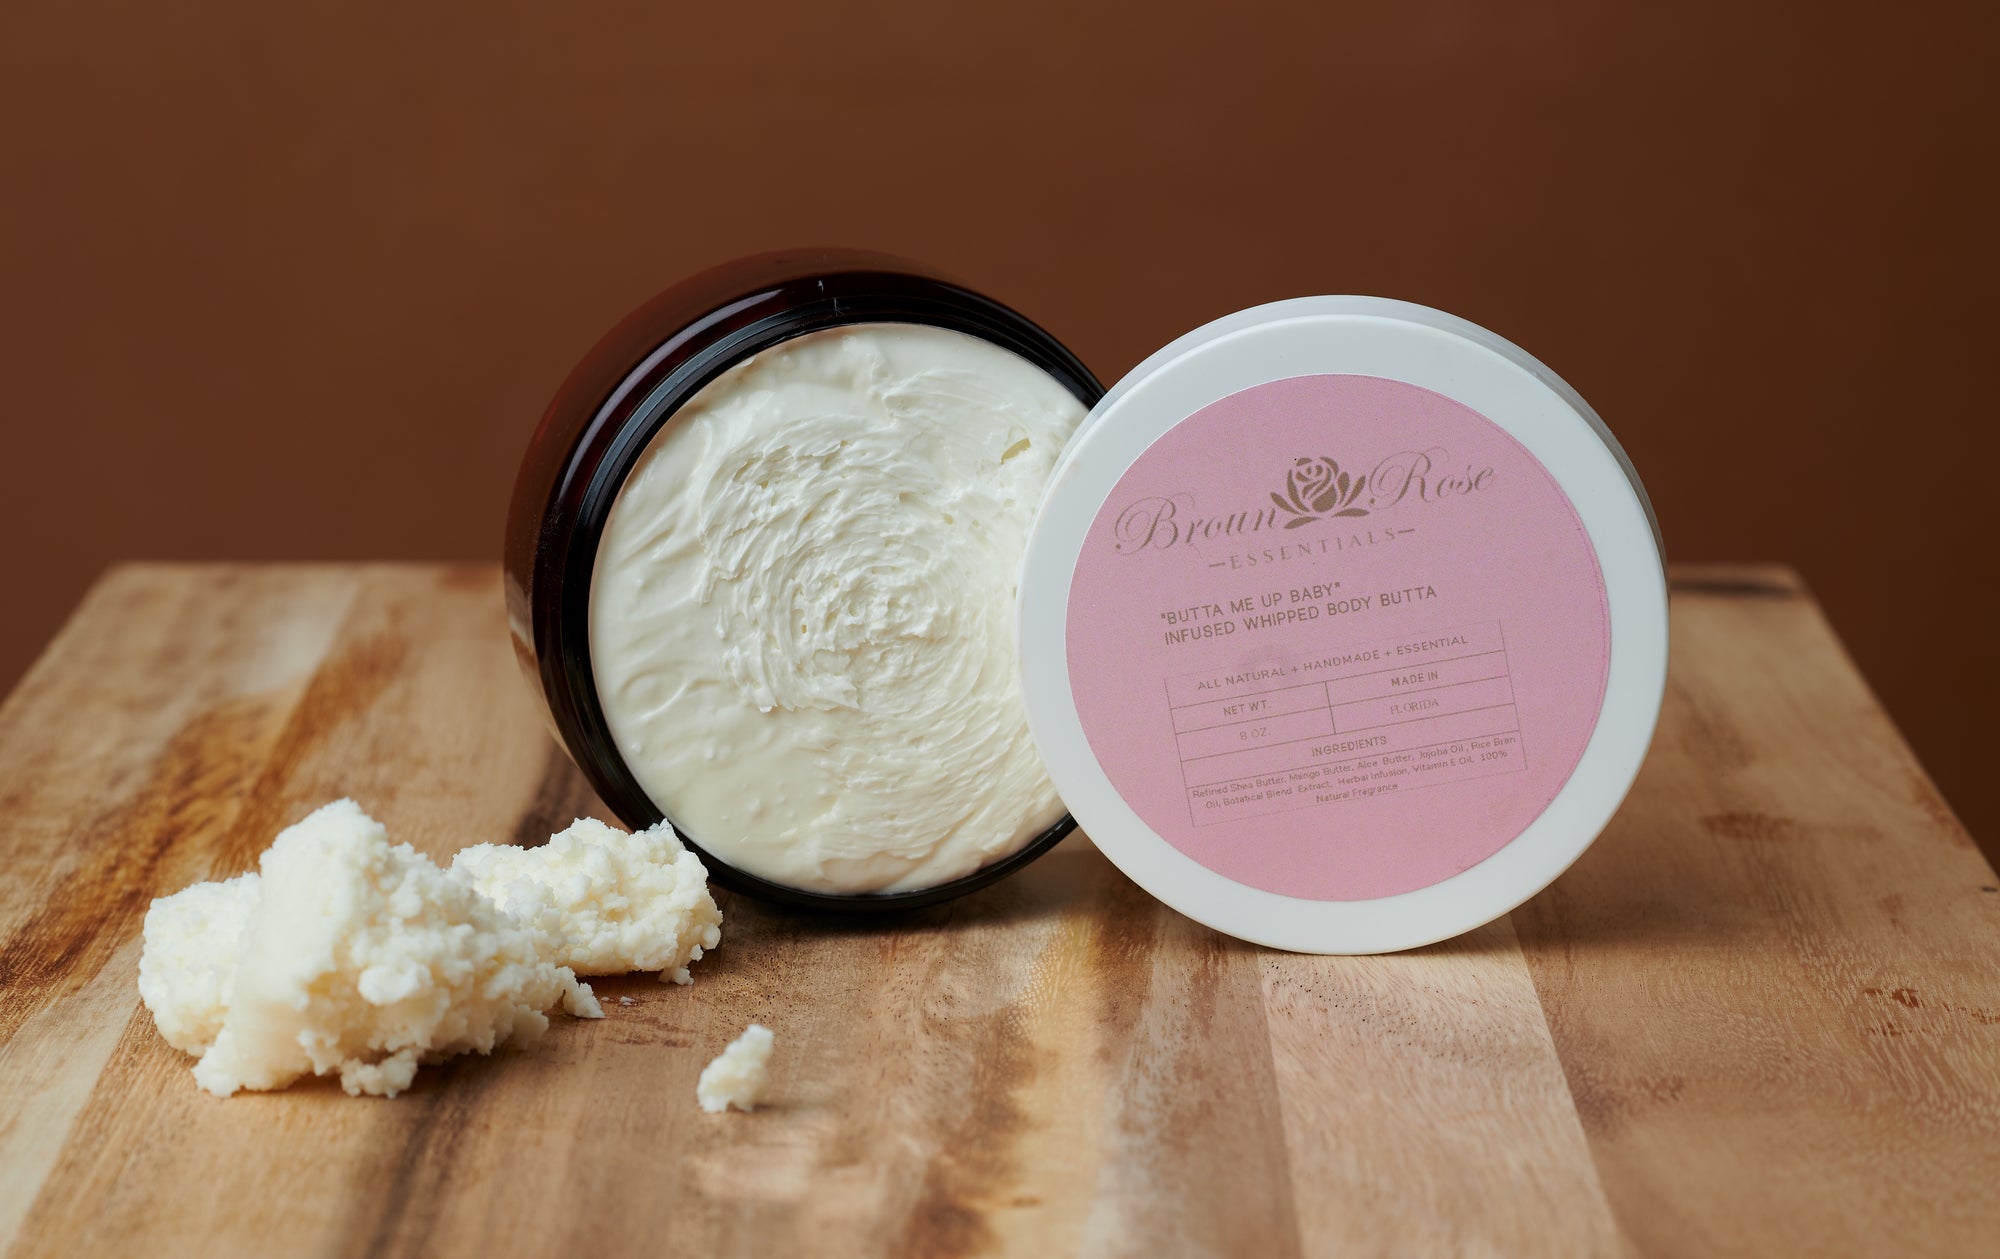 “Butta Me Up, Baby” Whipped Cocoa & Shea Body Butter